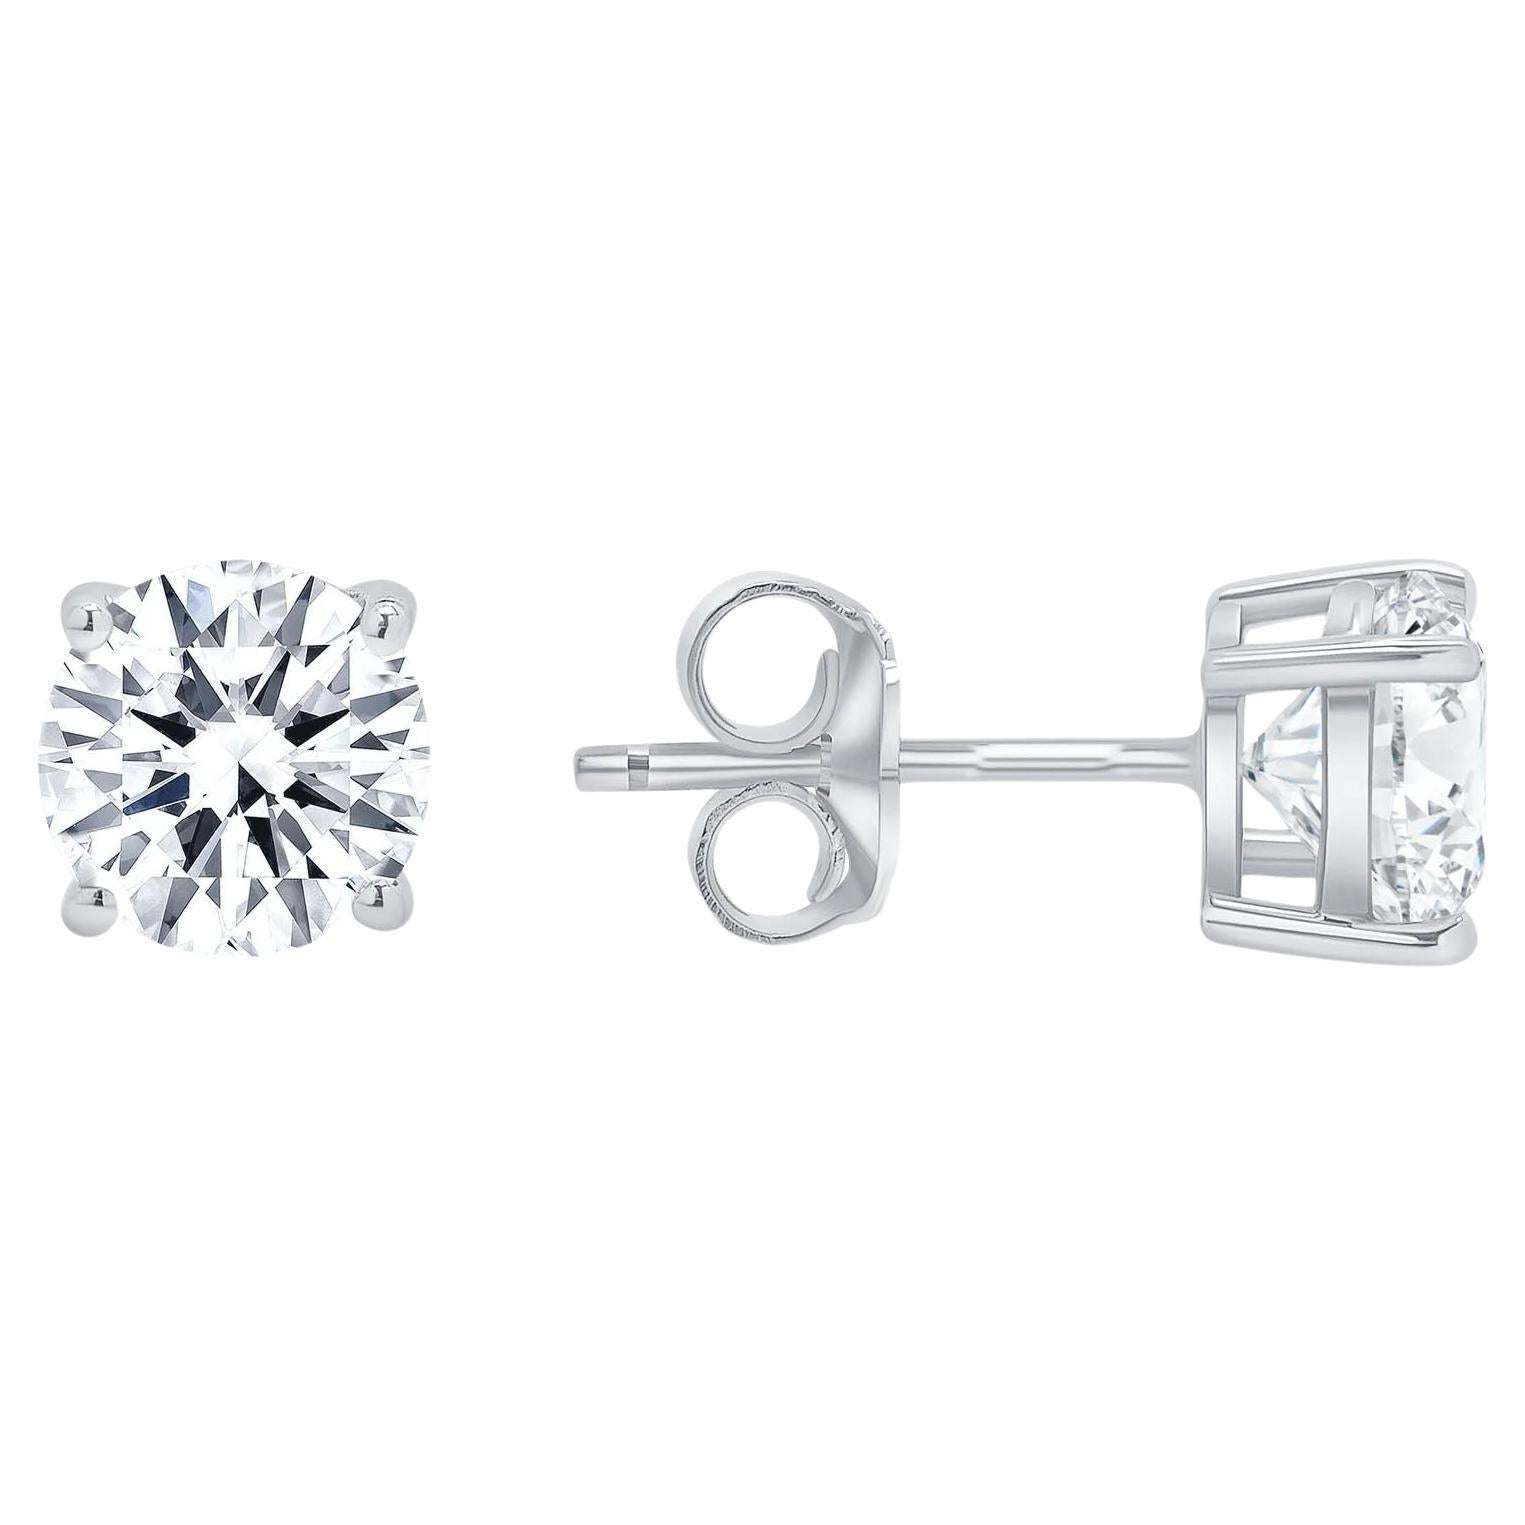 These diamond stud earrings beautiful matched, feature a pair of round diamonds set in a classic 14k gold setting

Earring Information
Setting : 4 Prong Push Back
Metal : 14k Gold
Diamond Carat Weight : 1 Carat
Diamond Cut : Round Natural Conflict